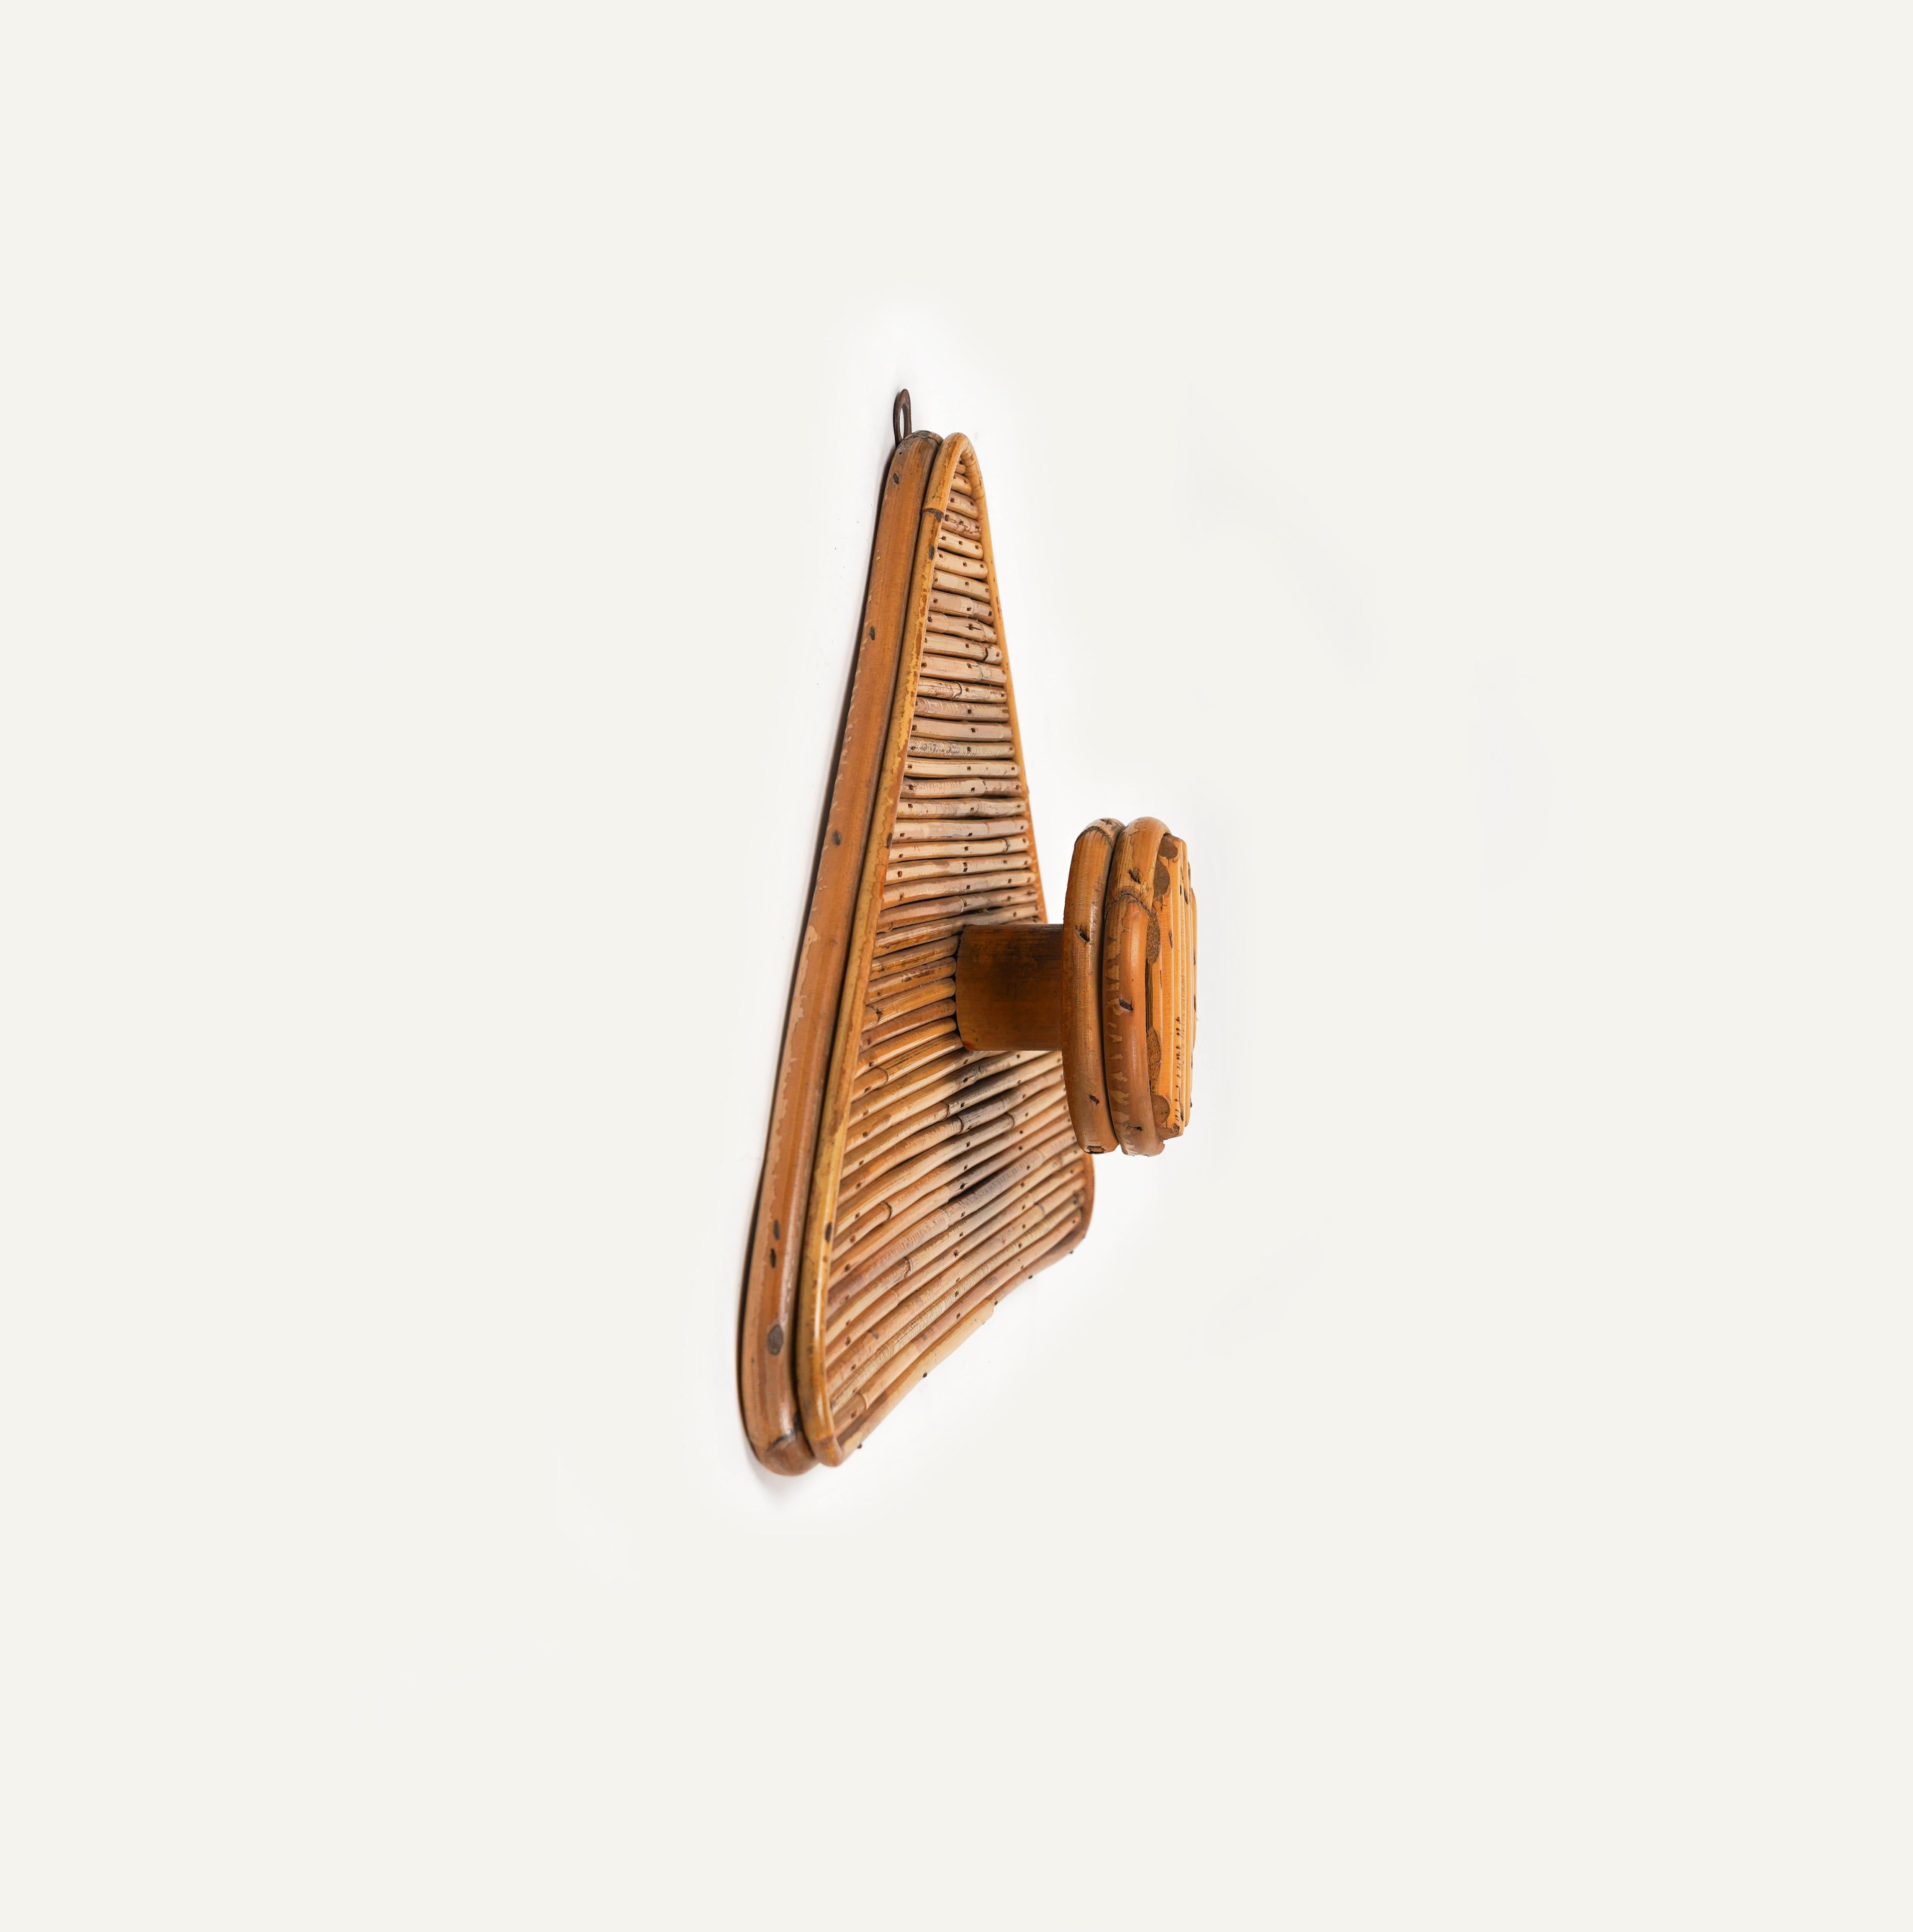 Bamboo and Rattan Triangular Coat Rack Stand Vivai Del Sud Style, Italy 1960s In Good Condition For Sale In Rome, IT